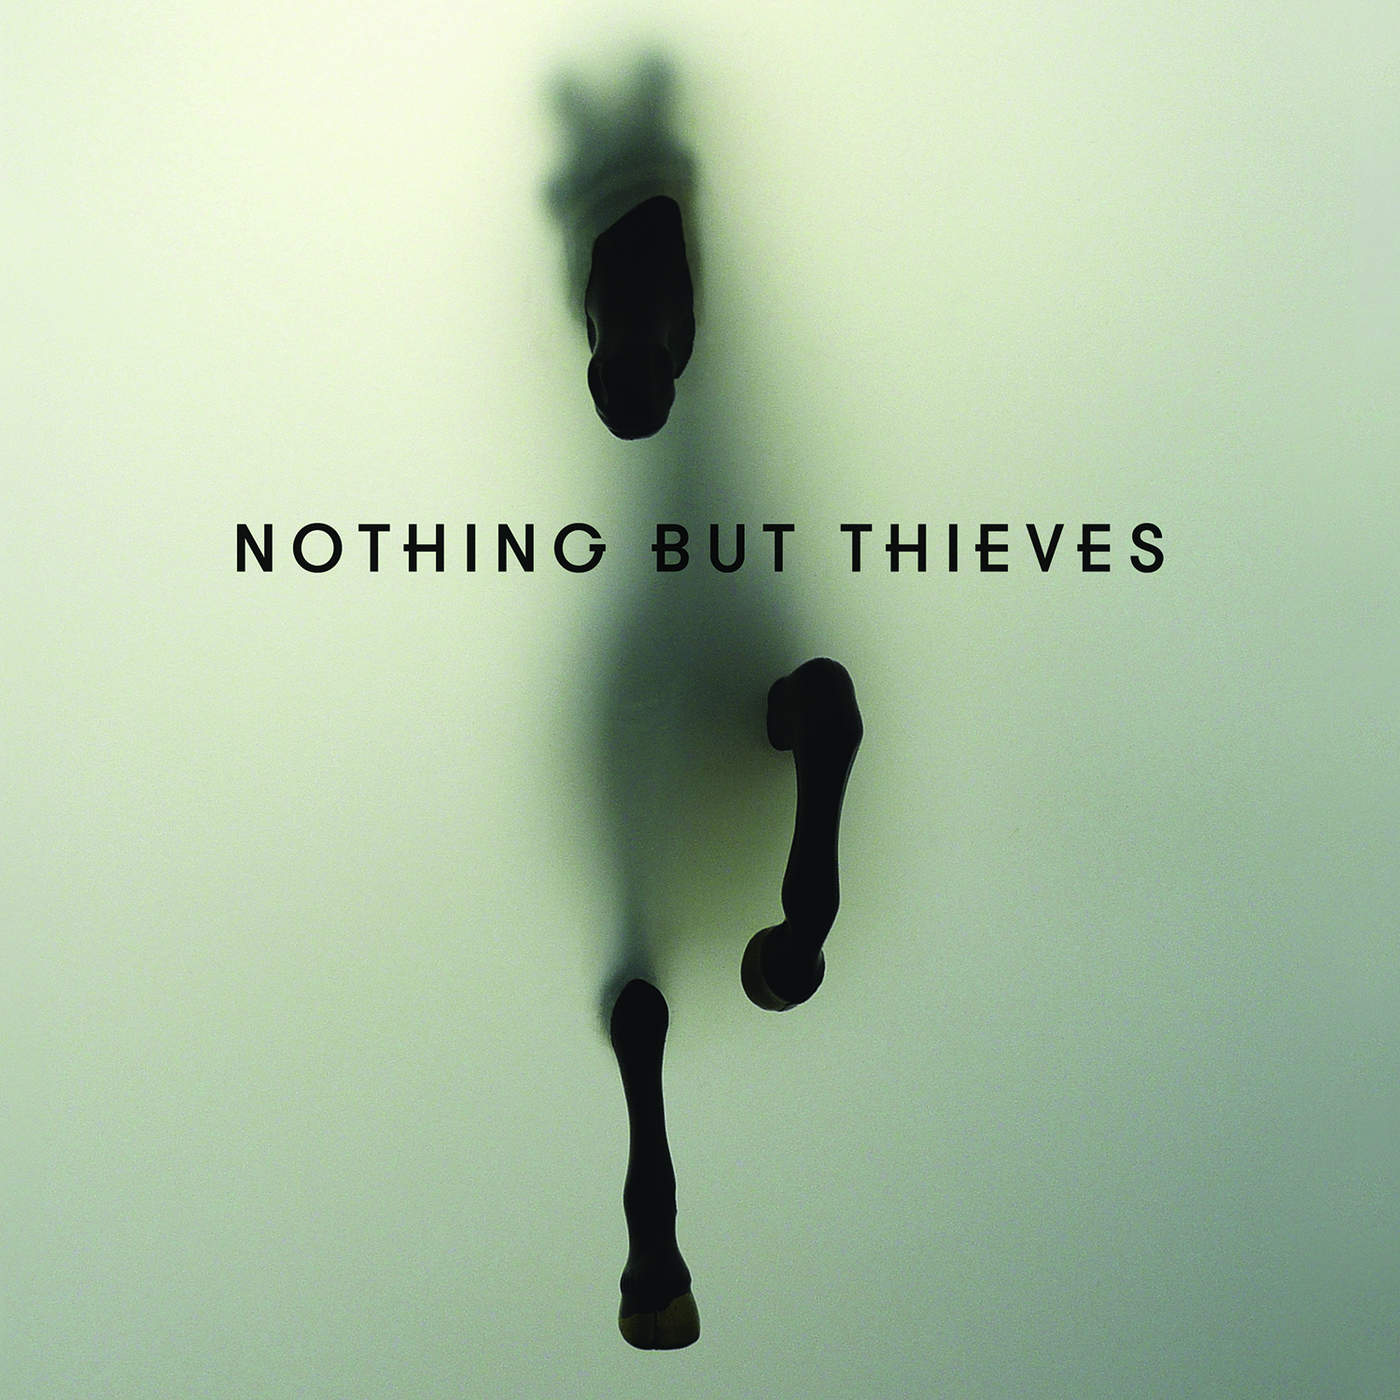 Nothing But Thieves - Nothing But Thieves (Deluxe Edition) (2015) Album Info